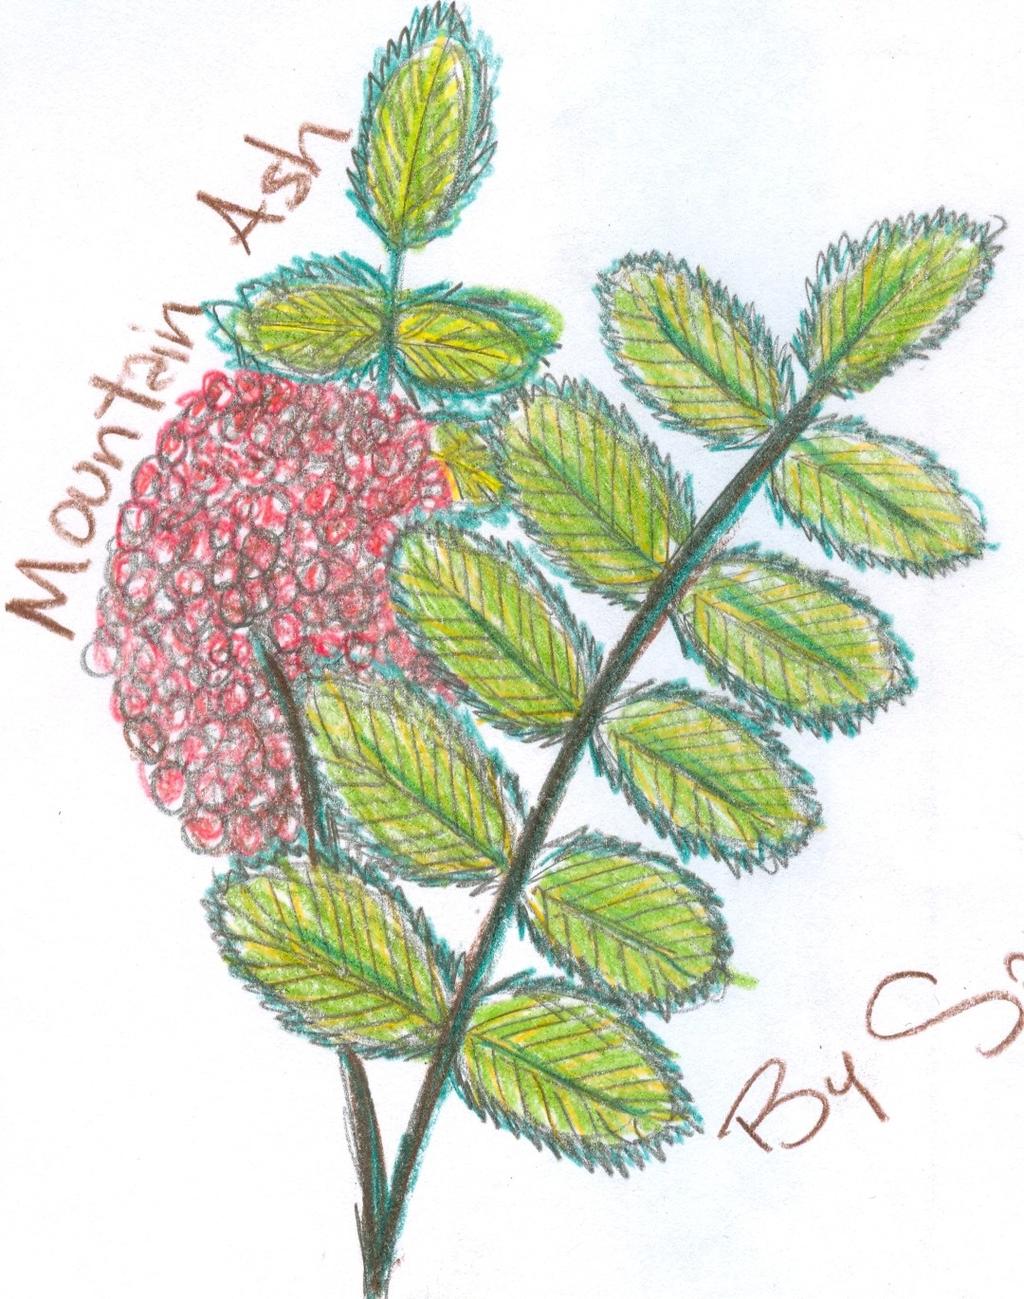 Mountain Ash Member of the rose family. Drawing and research by Savannah Stroud Has compound leaves. Is NOT related to other Ash species. Produces white flowers and red to orange berries.